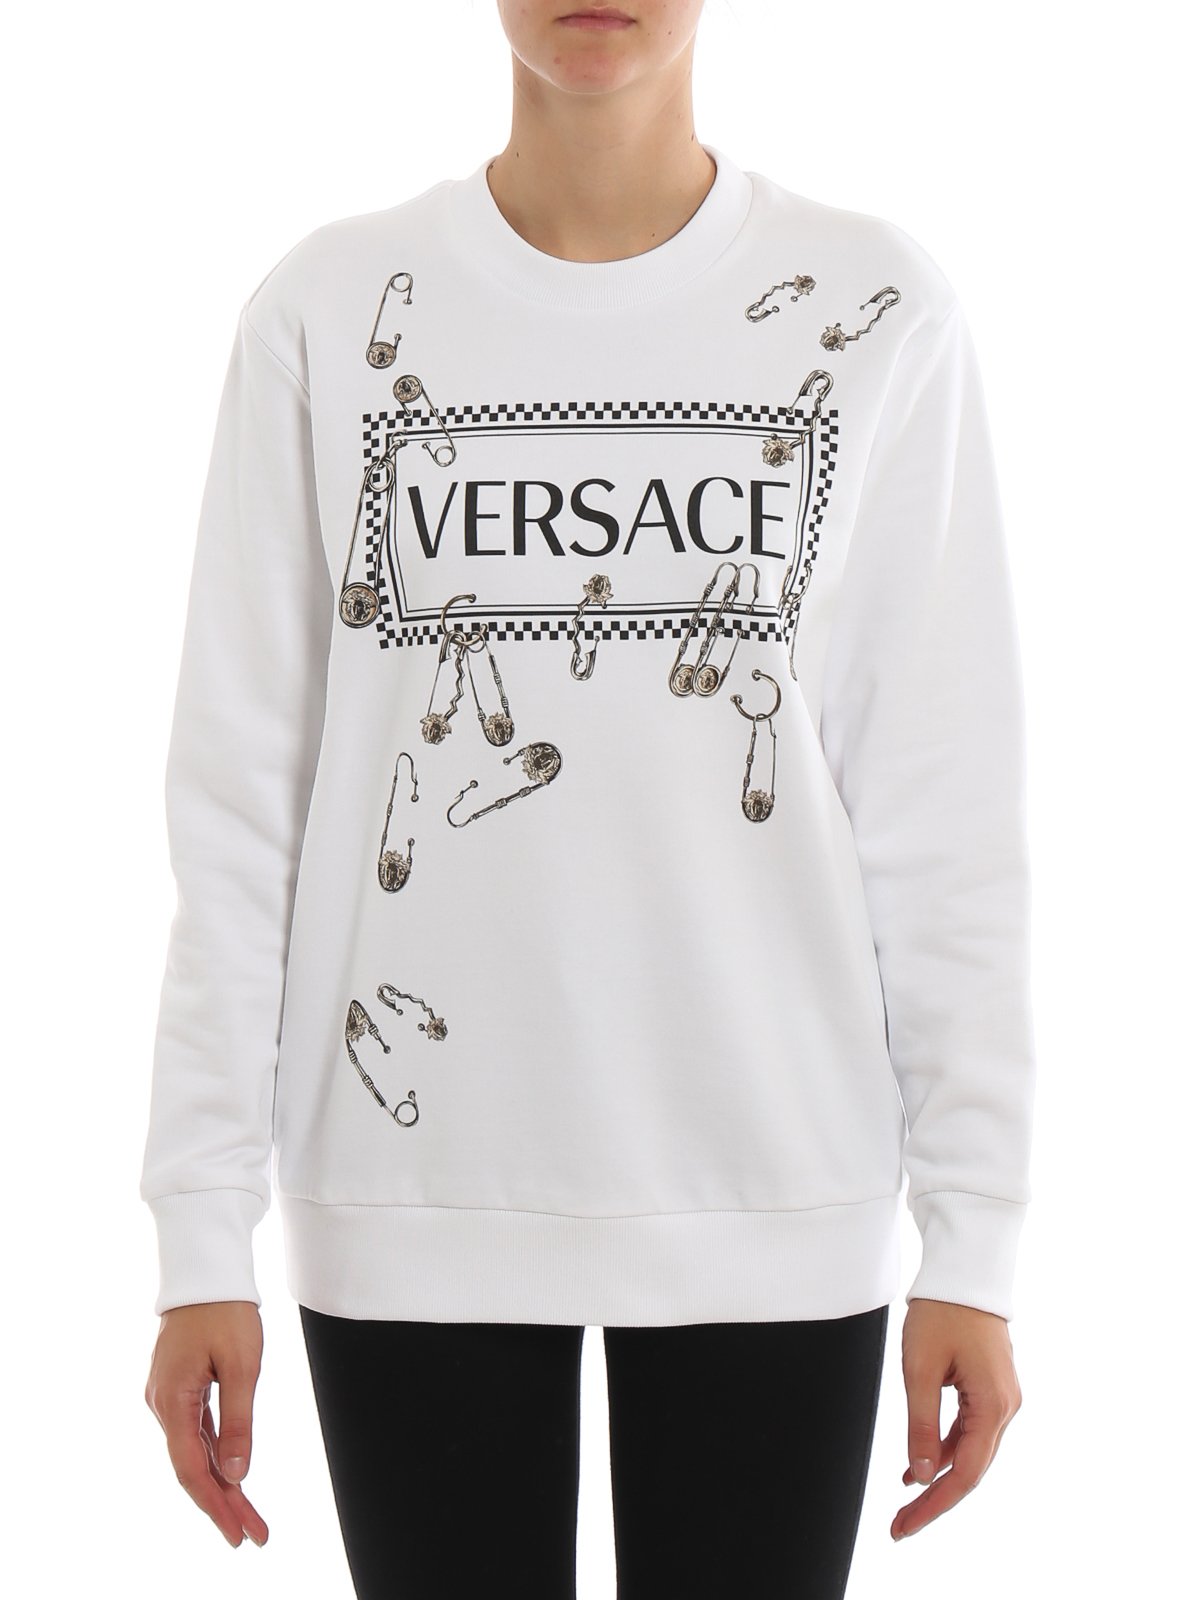 rivier voorstel forum Sweatshirts & Sweaters Versace - Safety Pin and 90s logo print sweatshirt -  A83929A227994A1001